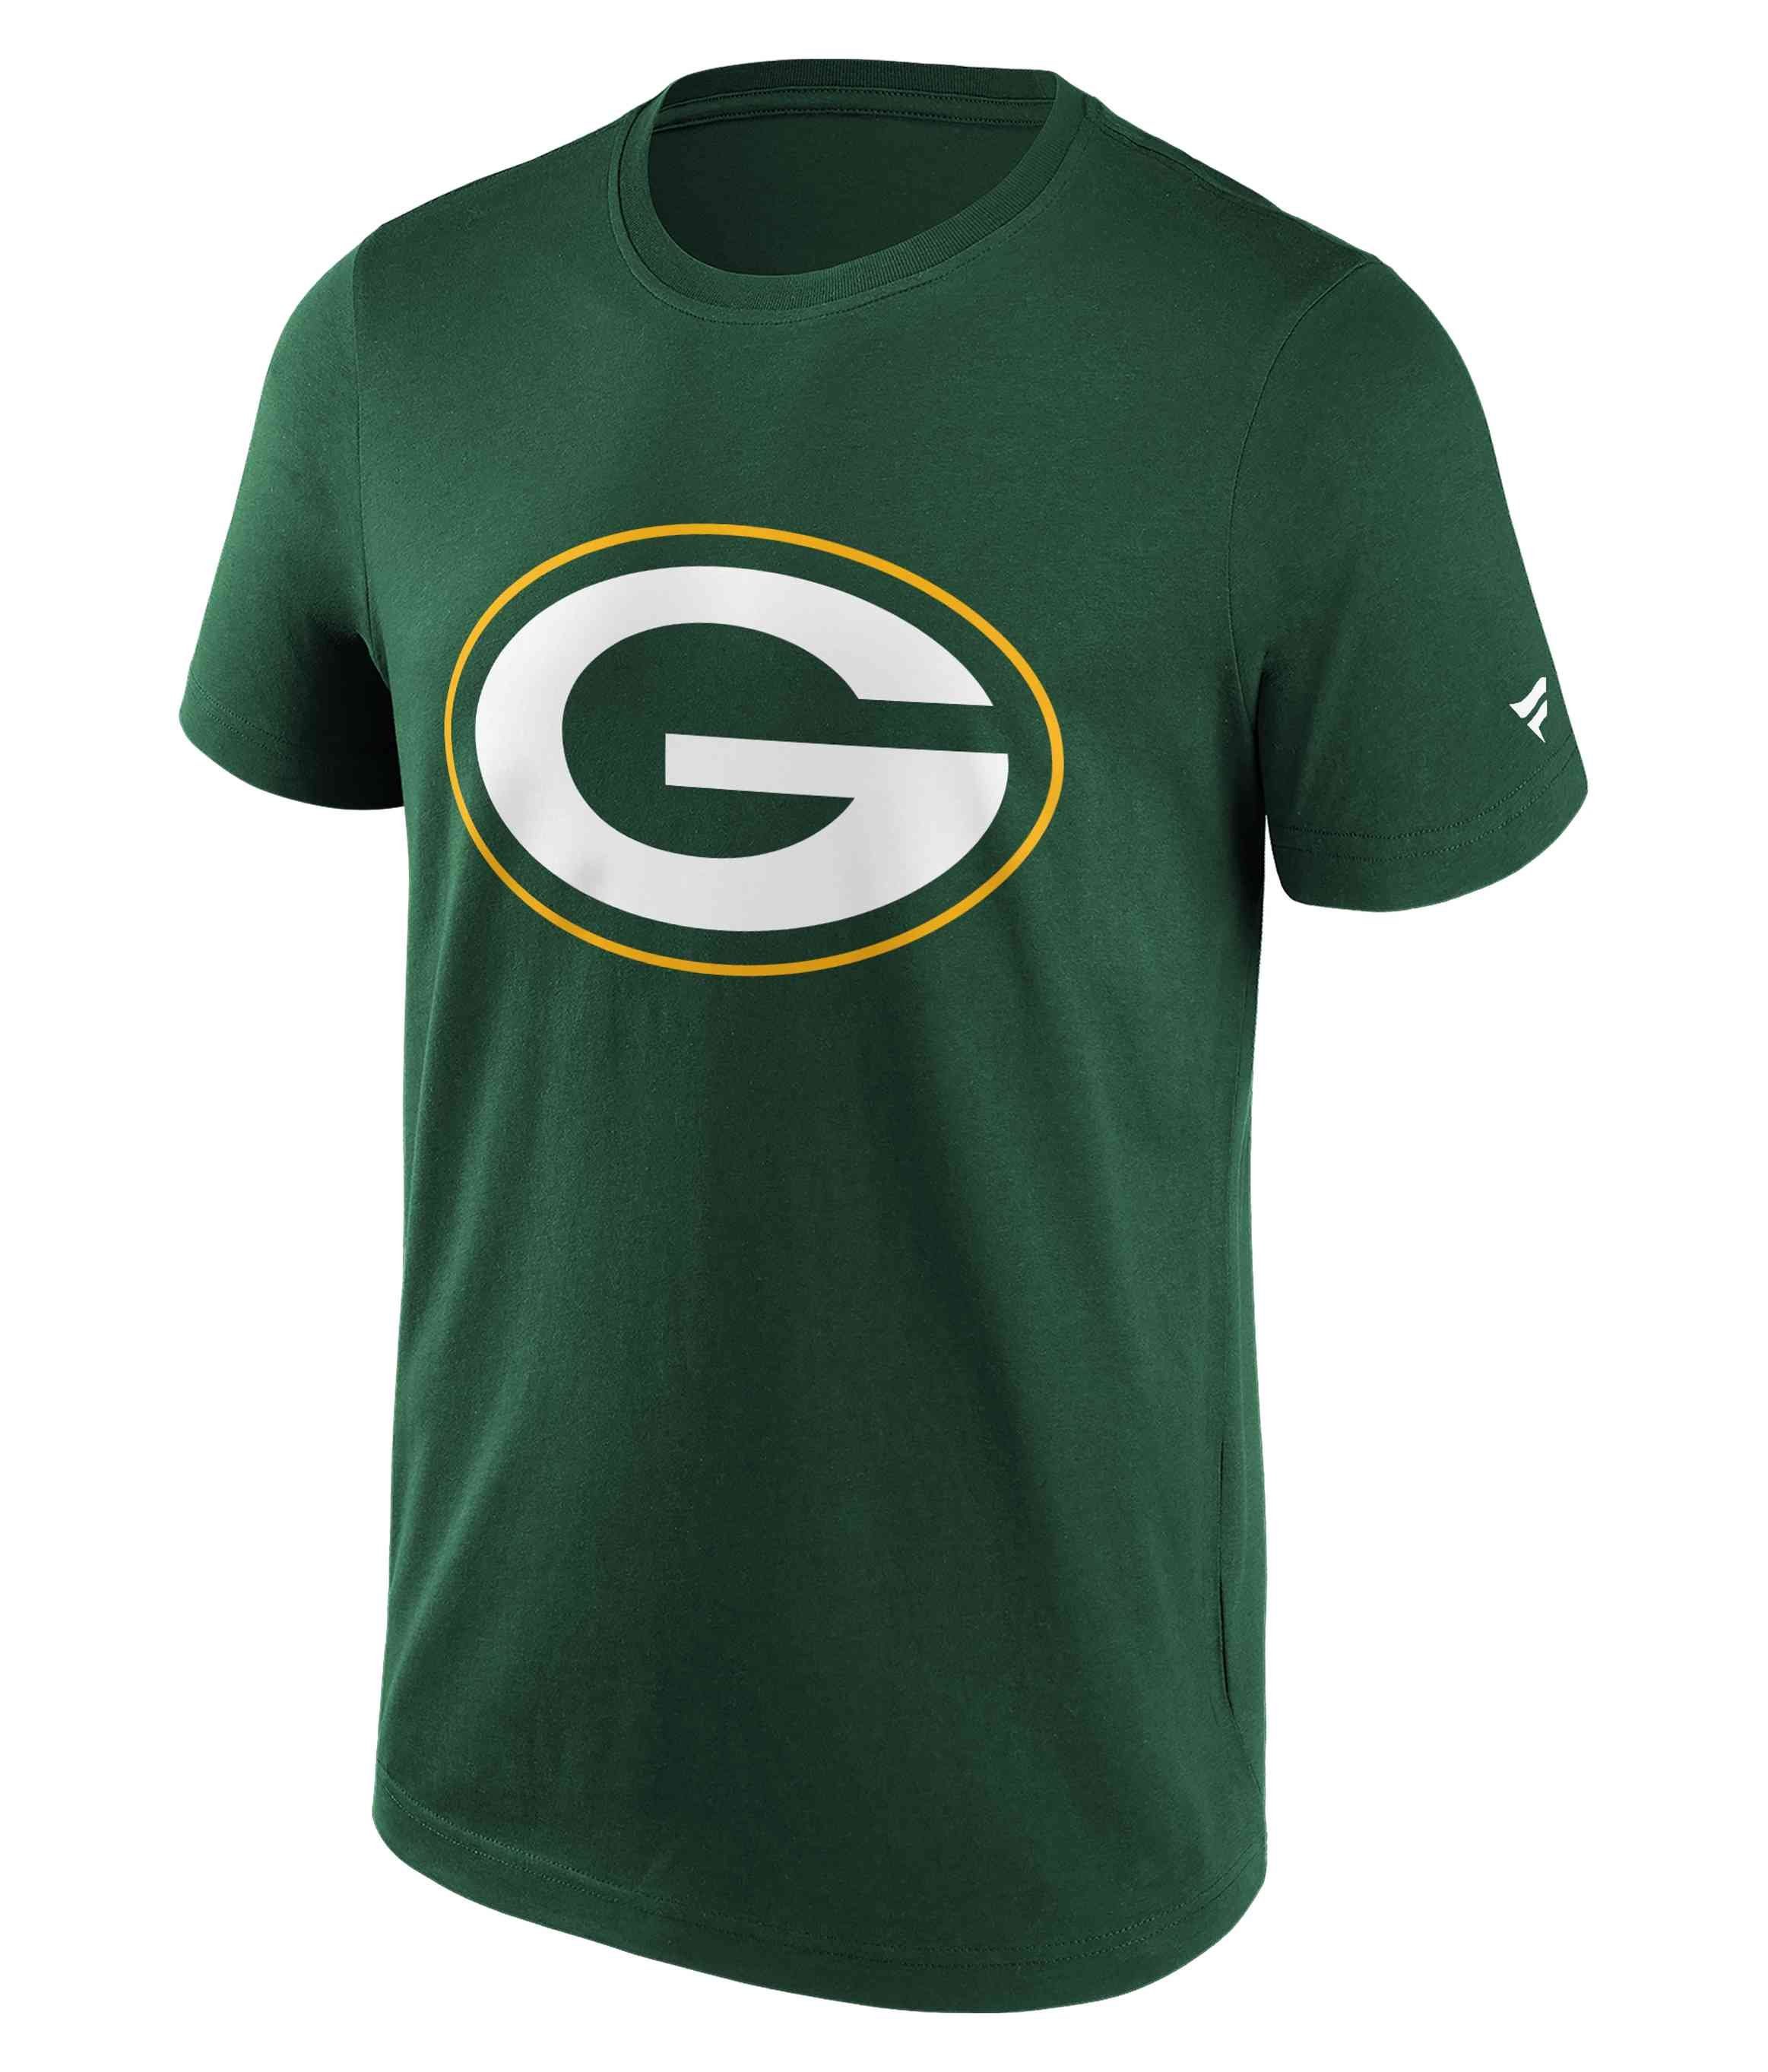 Green T-Shirt Packers NFL Fanatics Graphic Primary Logo Bay